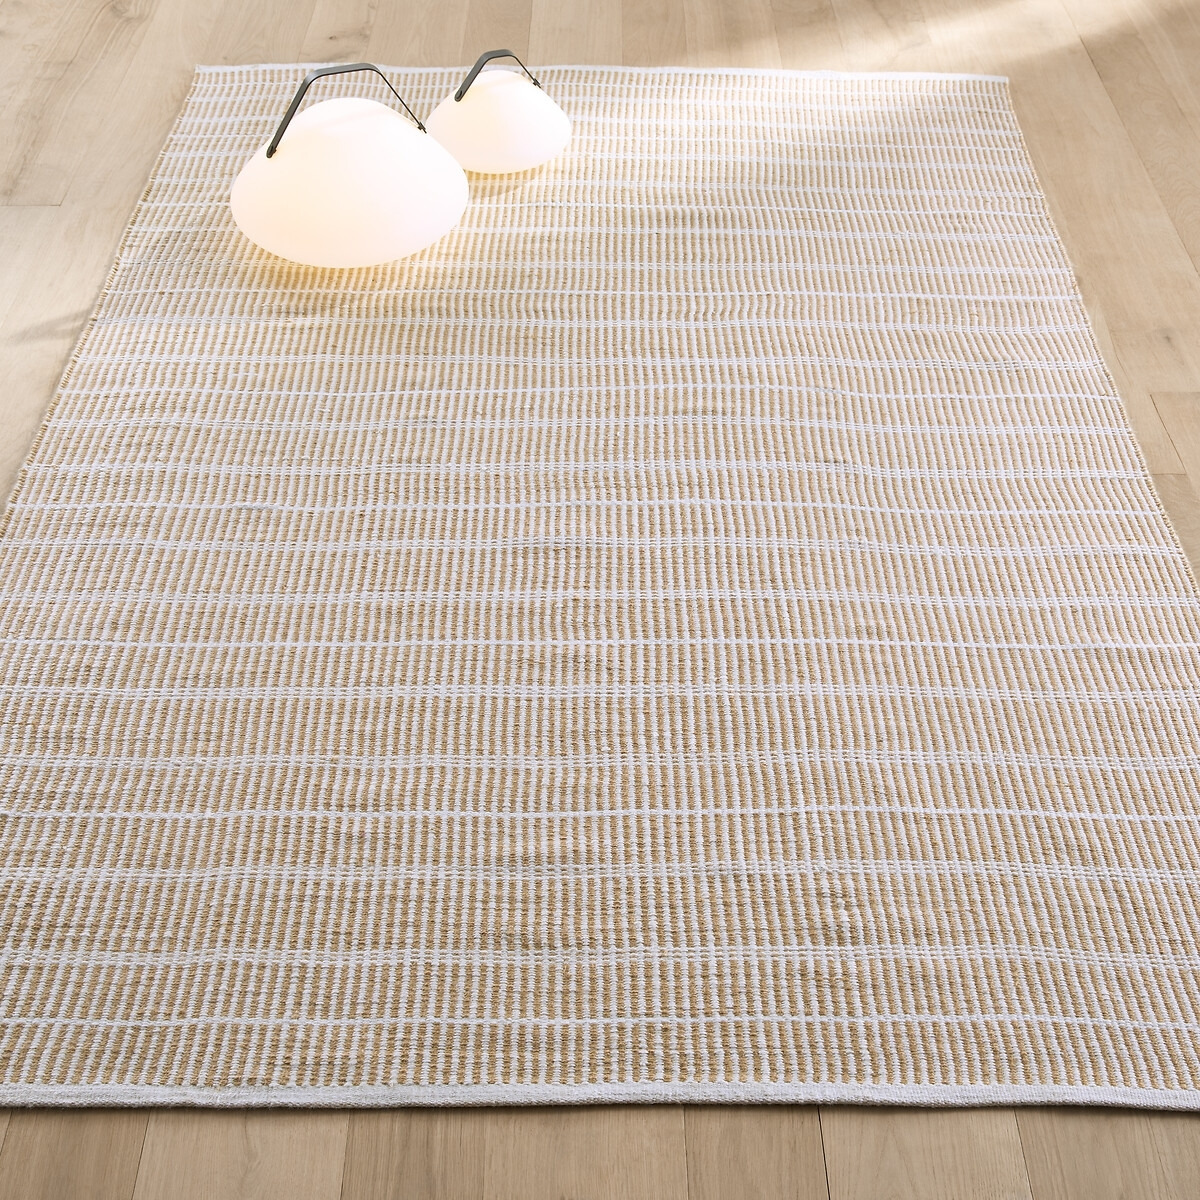 Linear Recycled Polyester Outdoor Rug - image 1